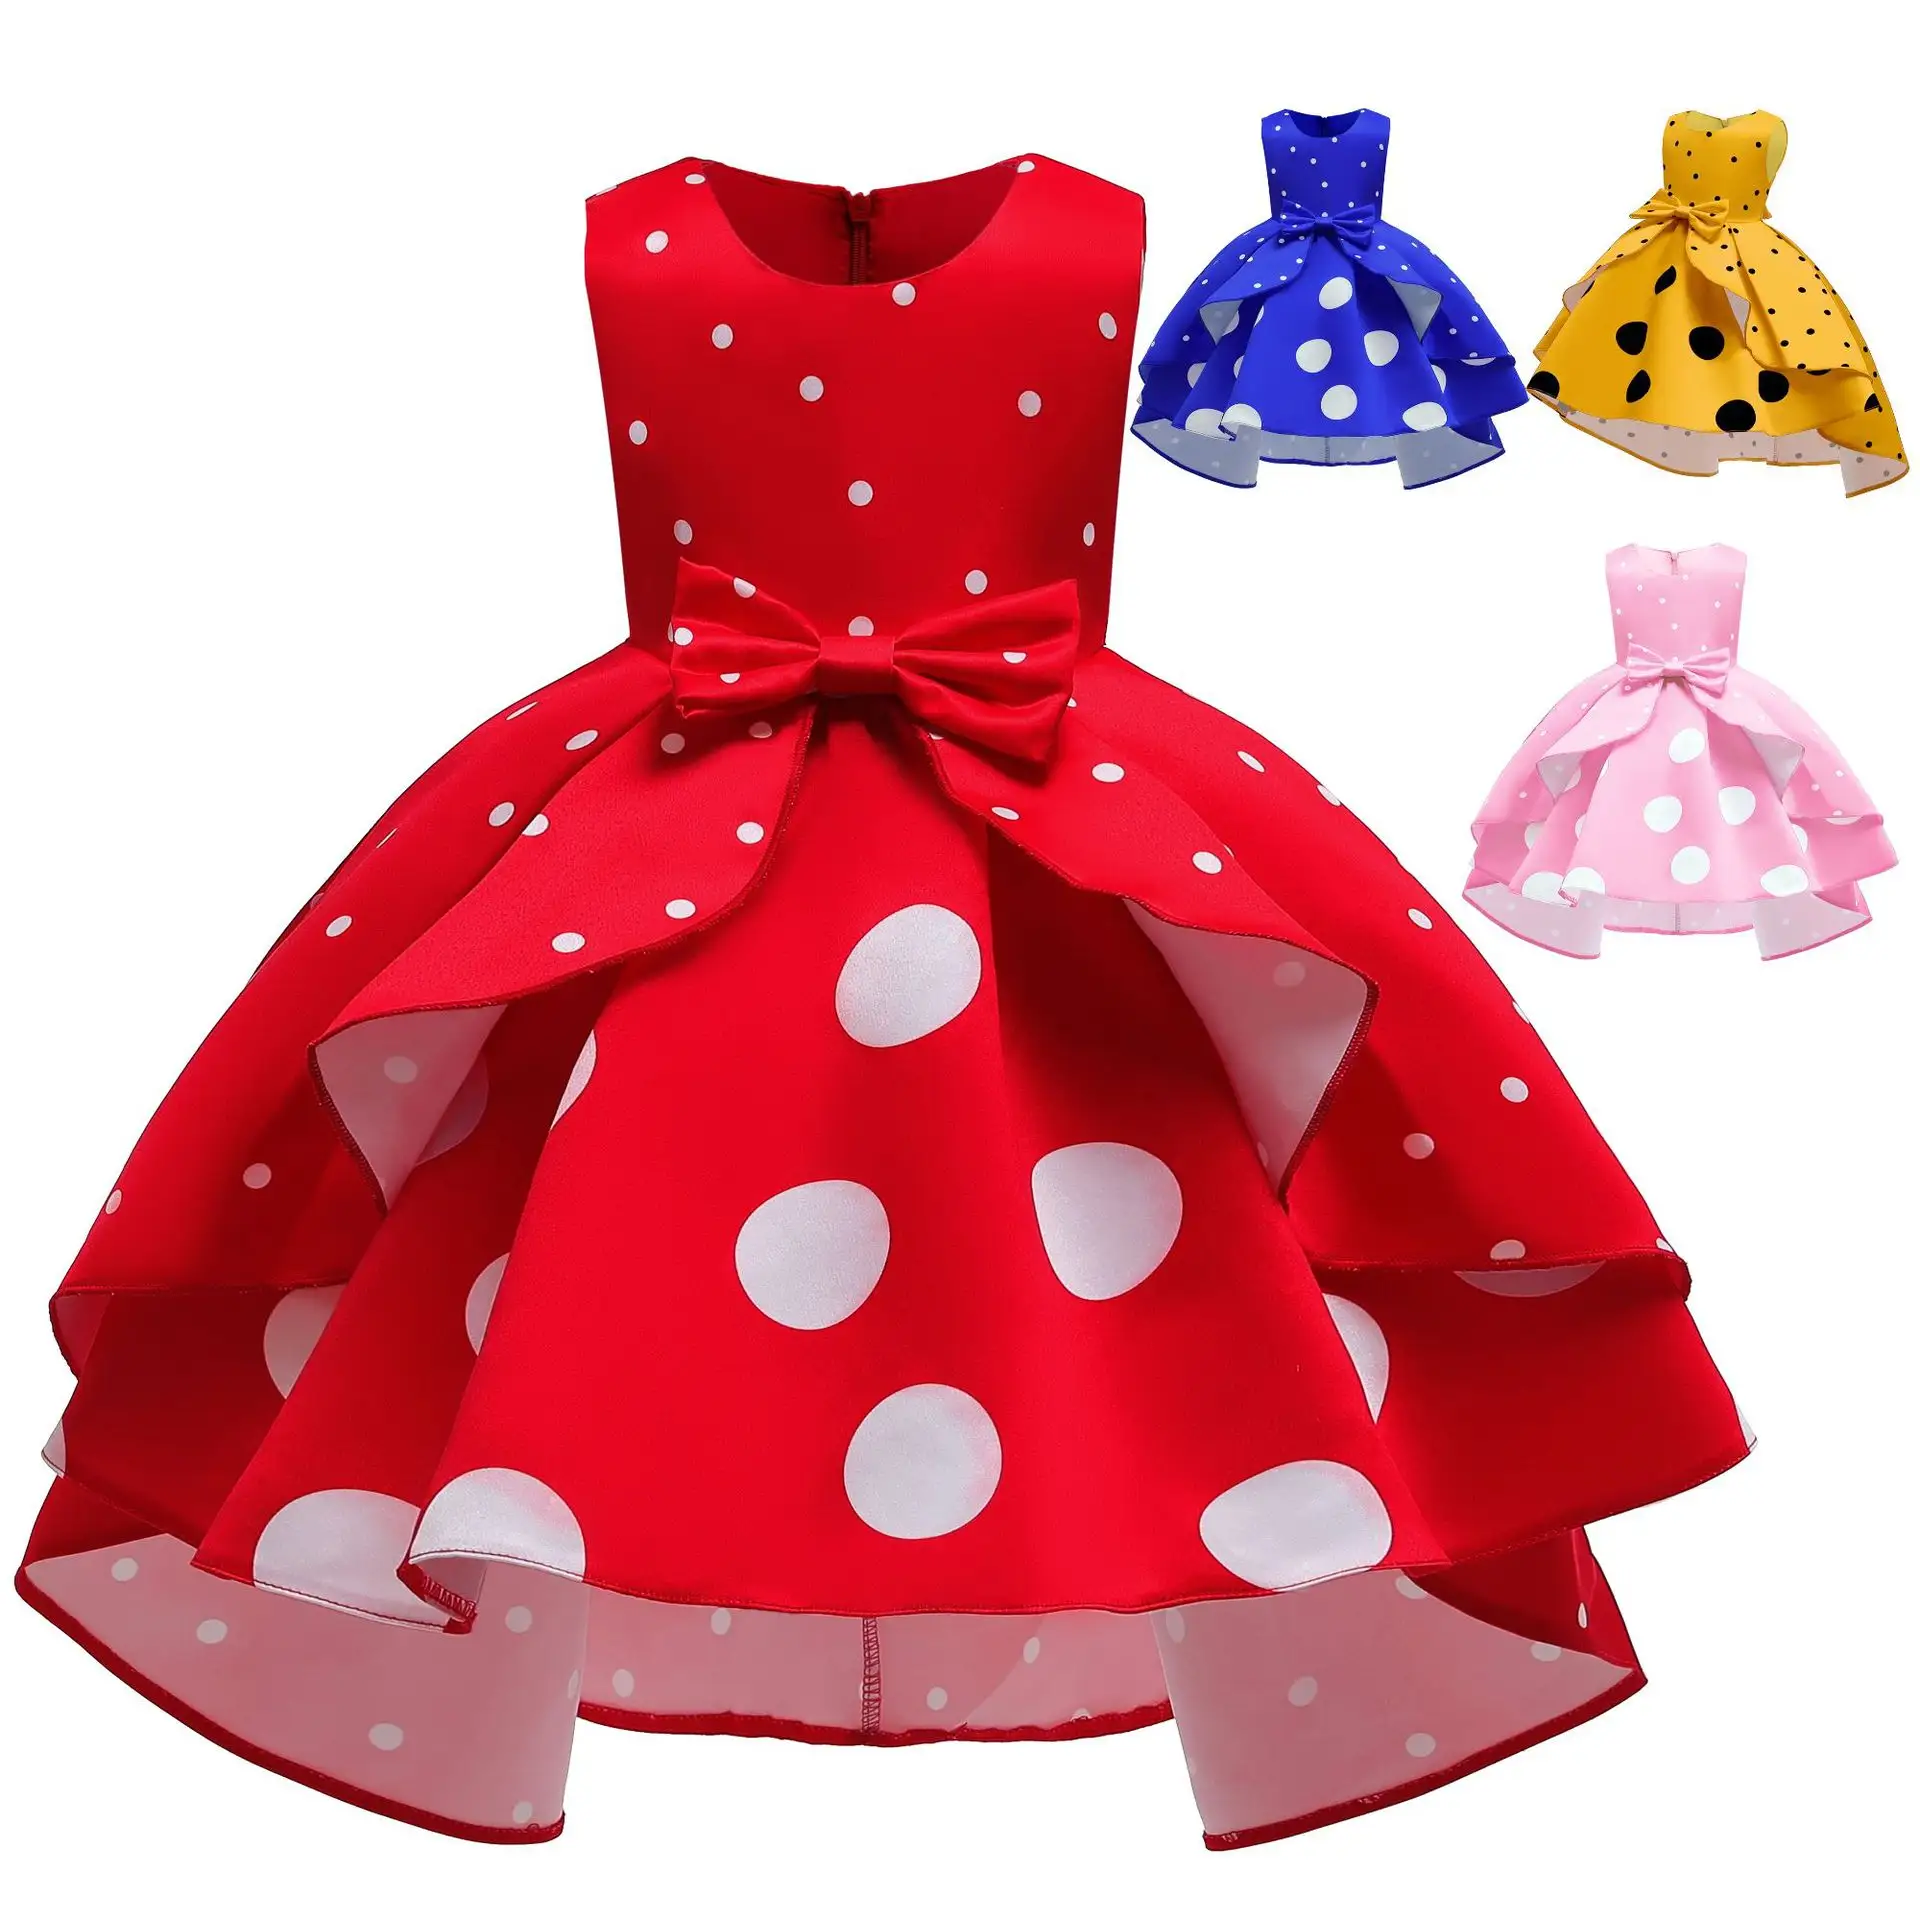 Hot Sell Boutique Kids Christmas Ball Gown Party Elegant Girls Birthday Dresses